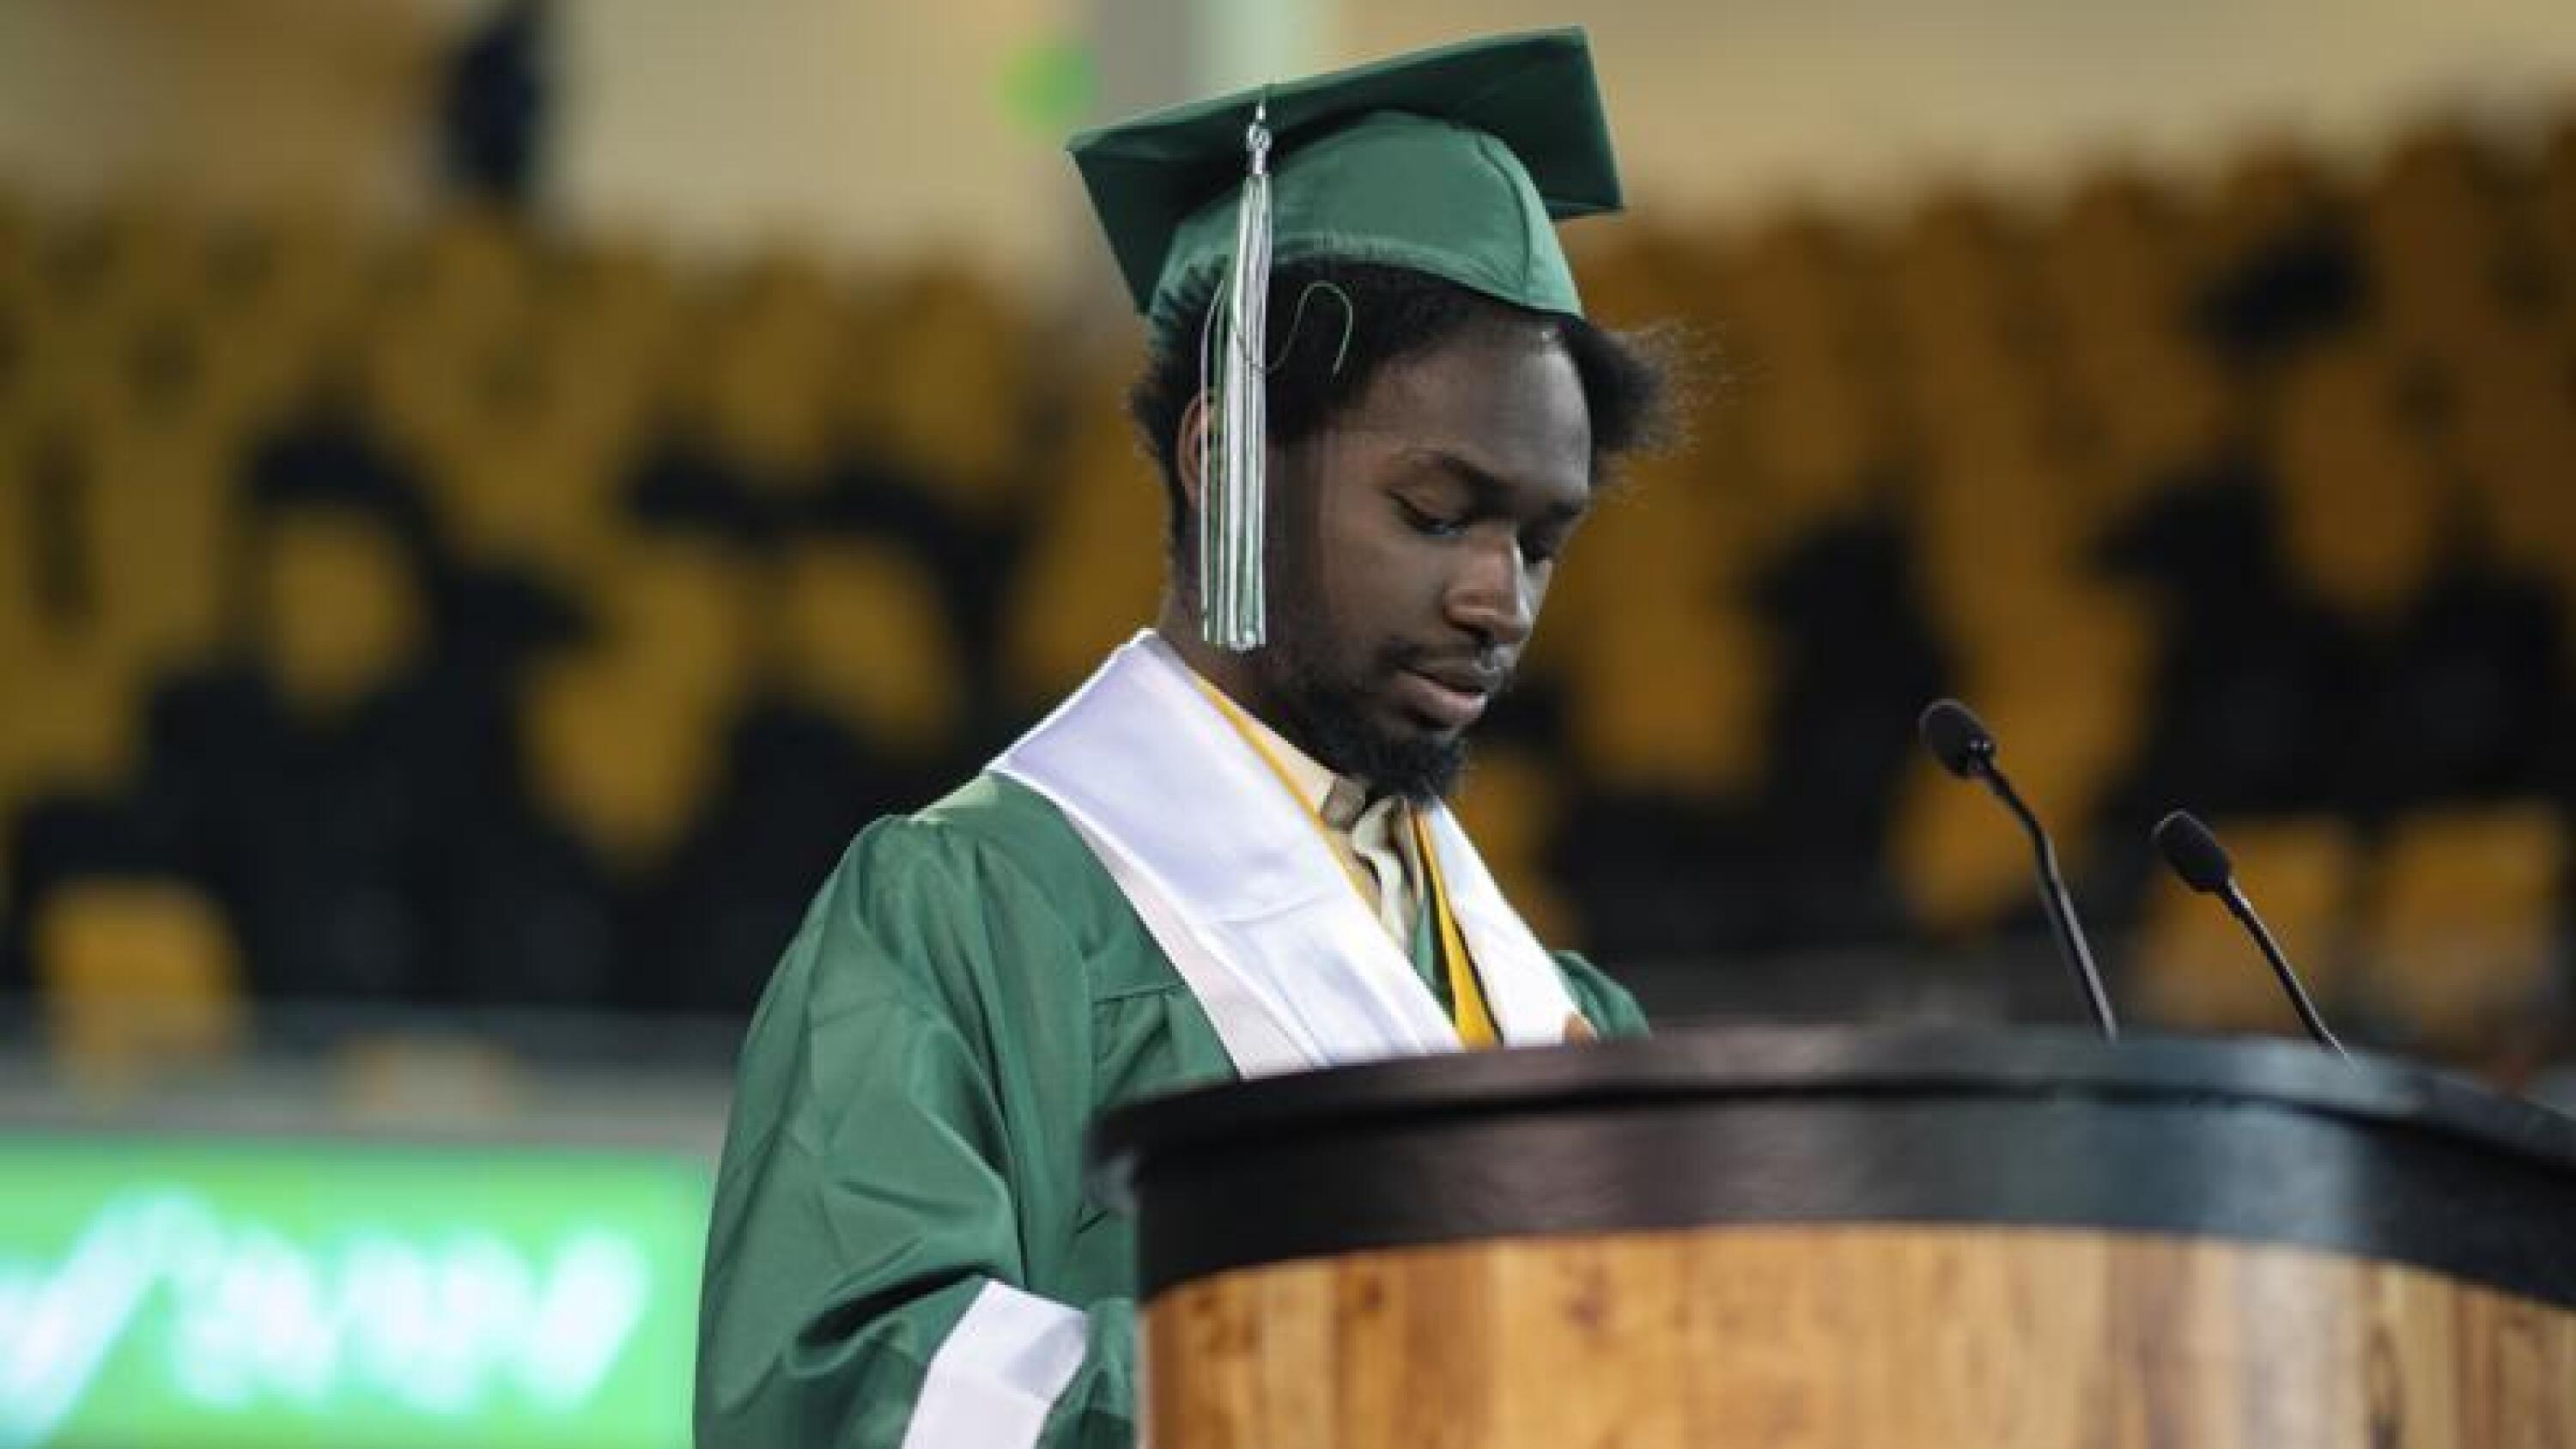 Valedictorian lived in homeless shelter as he rose to the top of his class